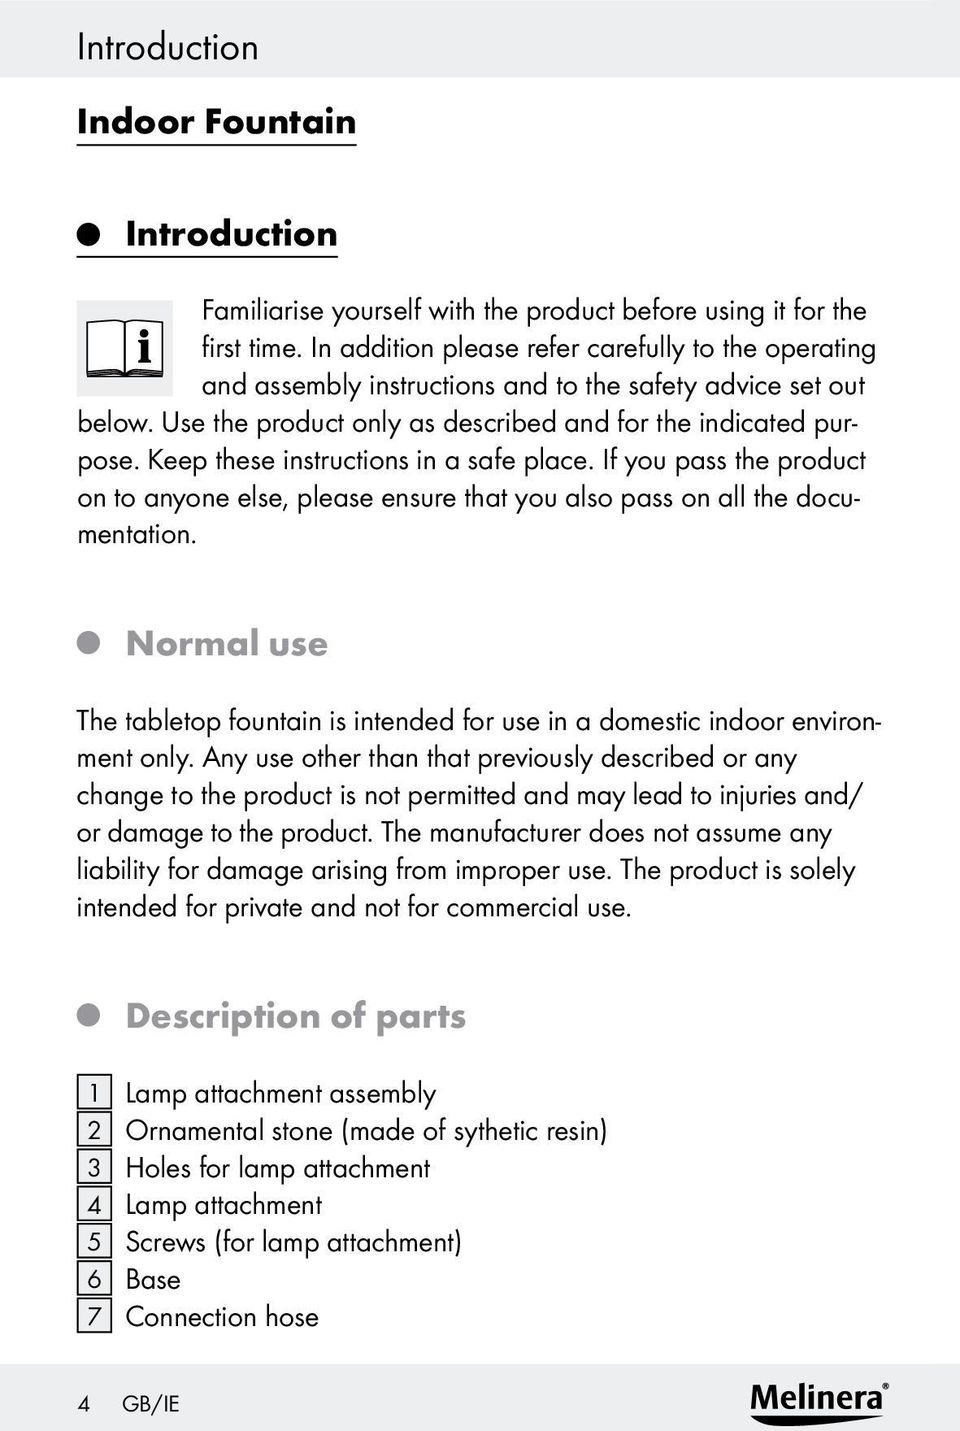 Keep these instructions in a safe place. If you pass the product on to anyone else, please ensure that you also pass on all the documentation.